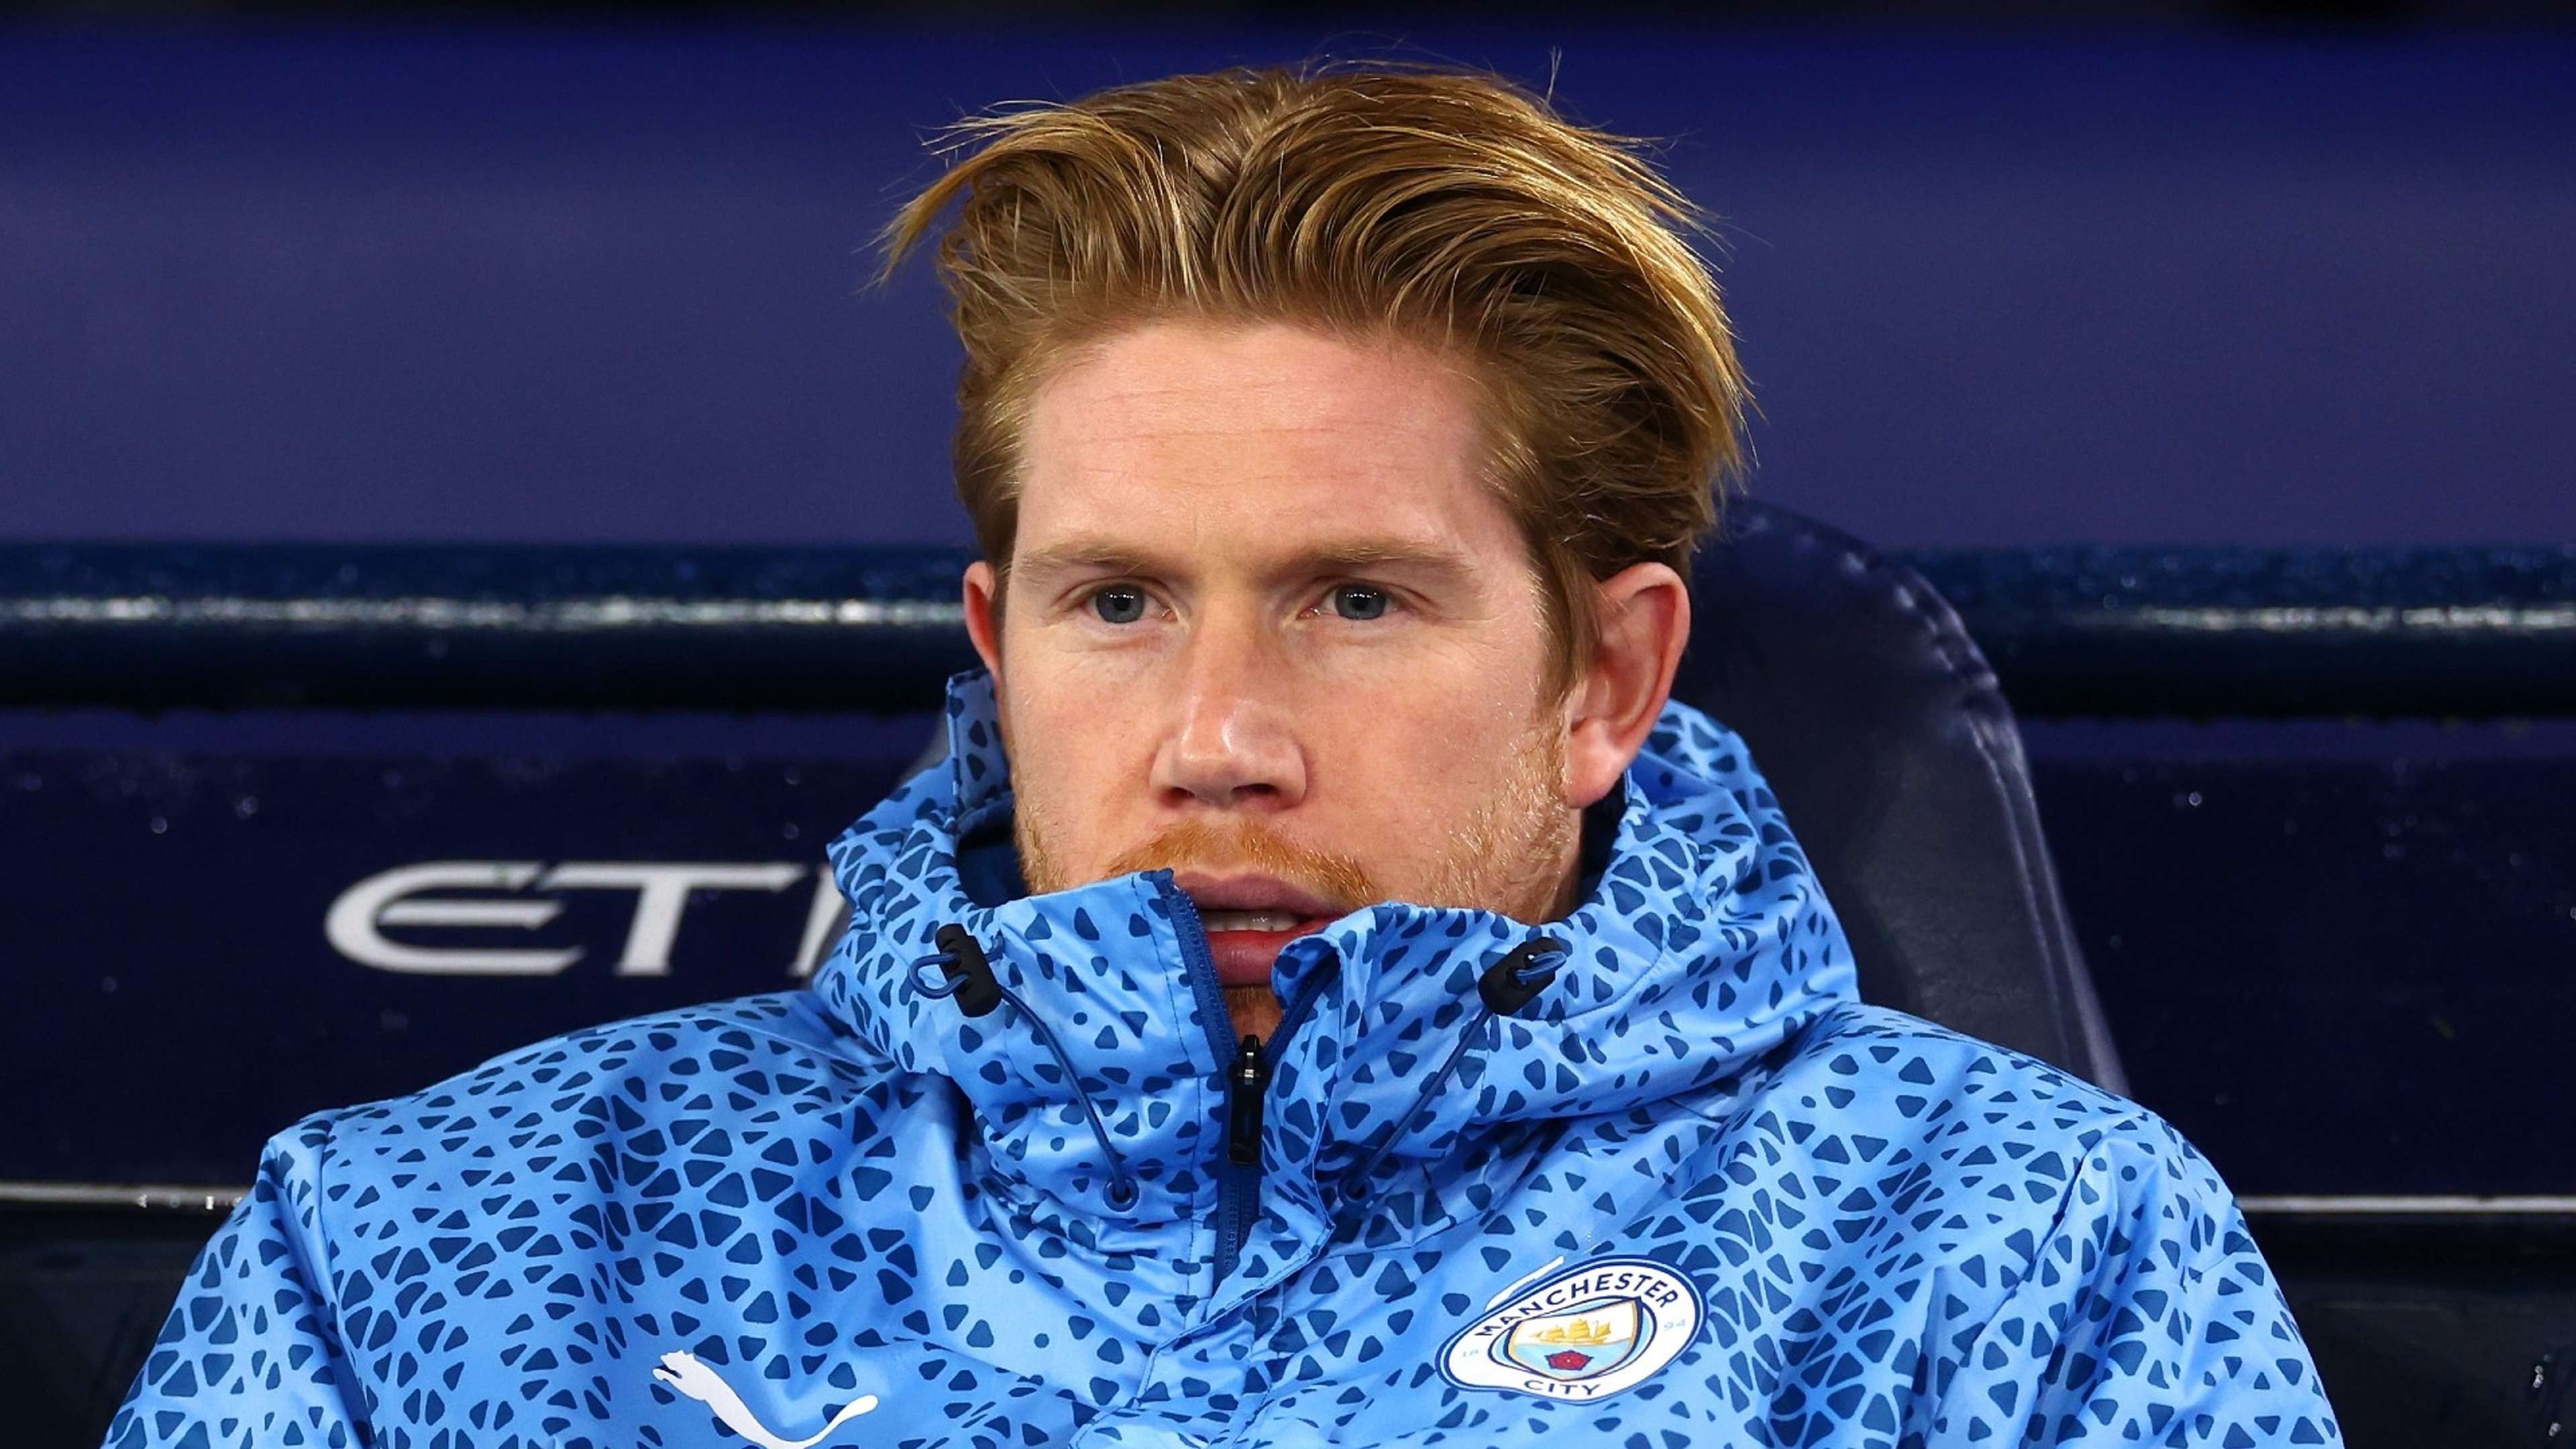 De Bruyne Benched For Health Reasons As City Faces Madrid In Champions League Quarterfinals